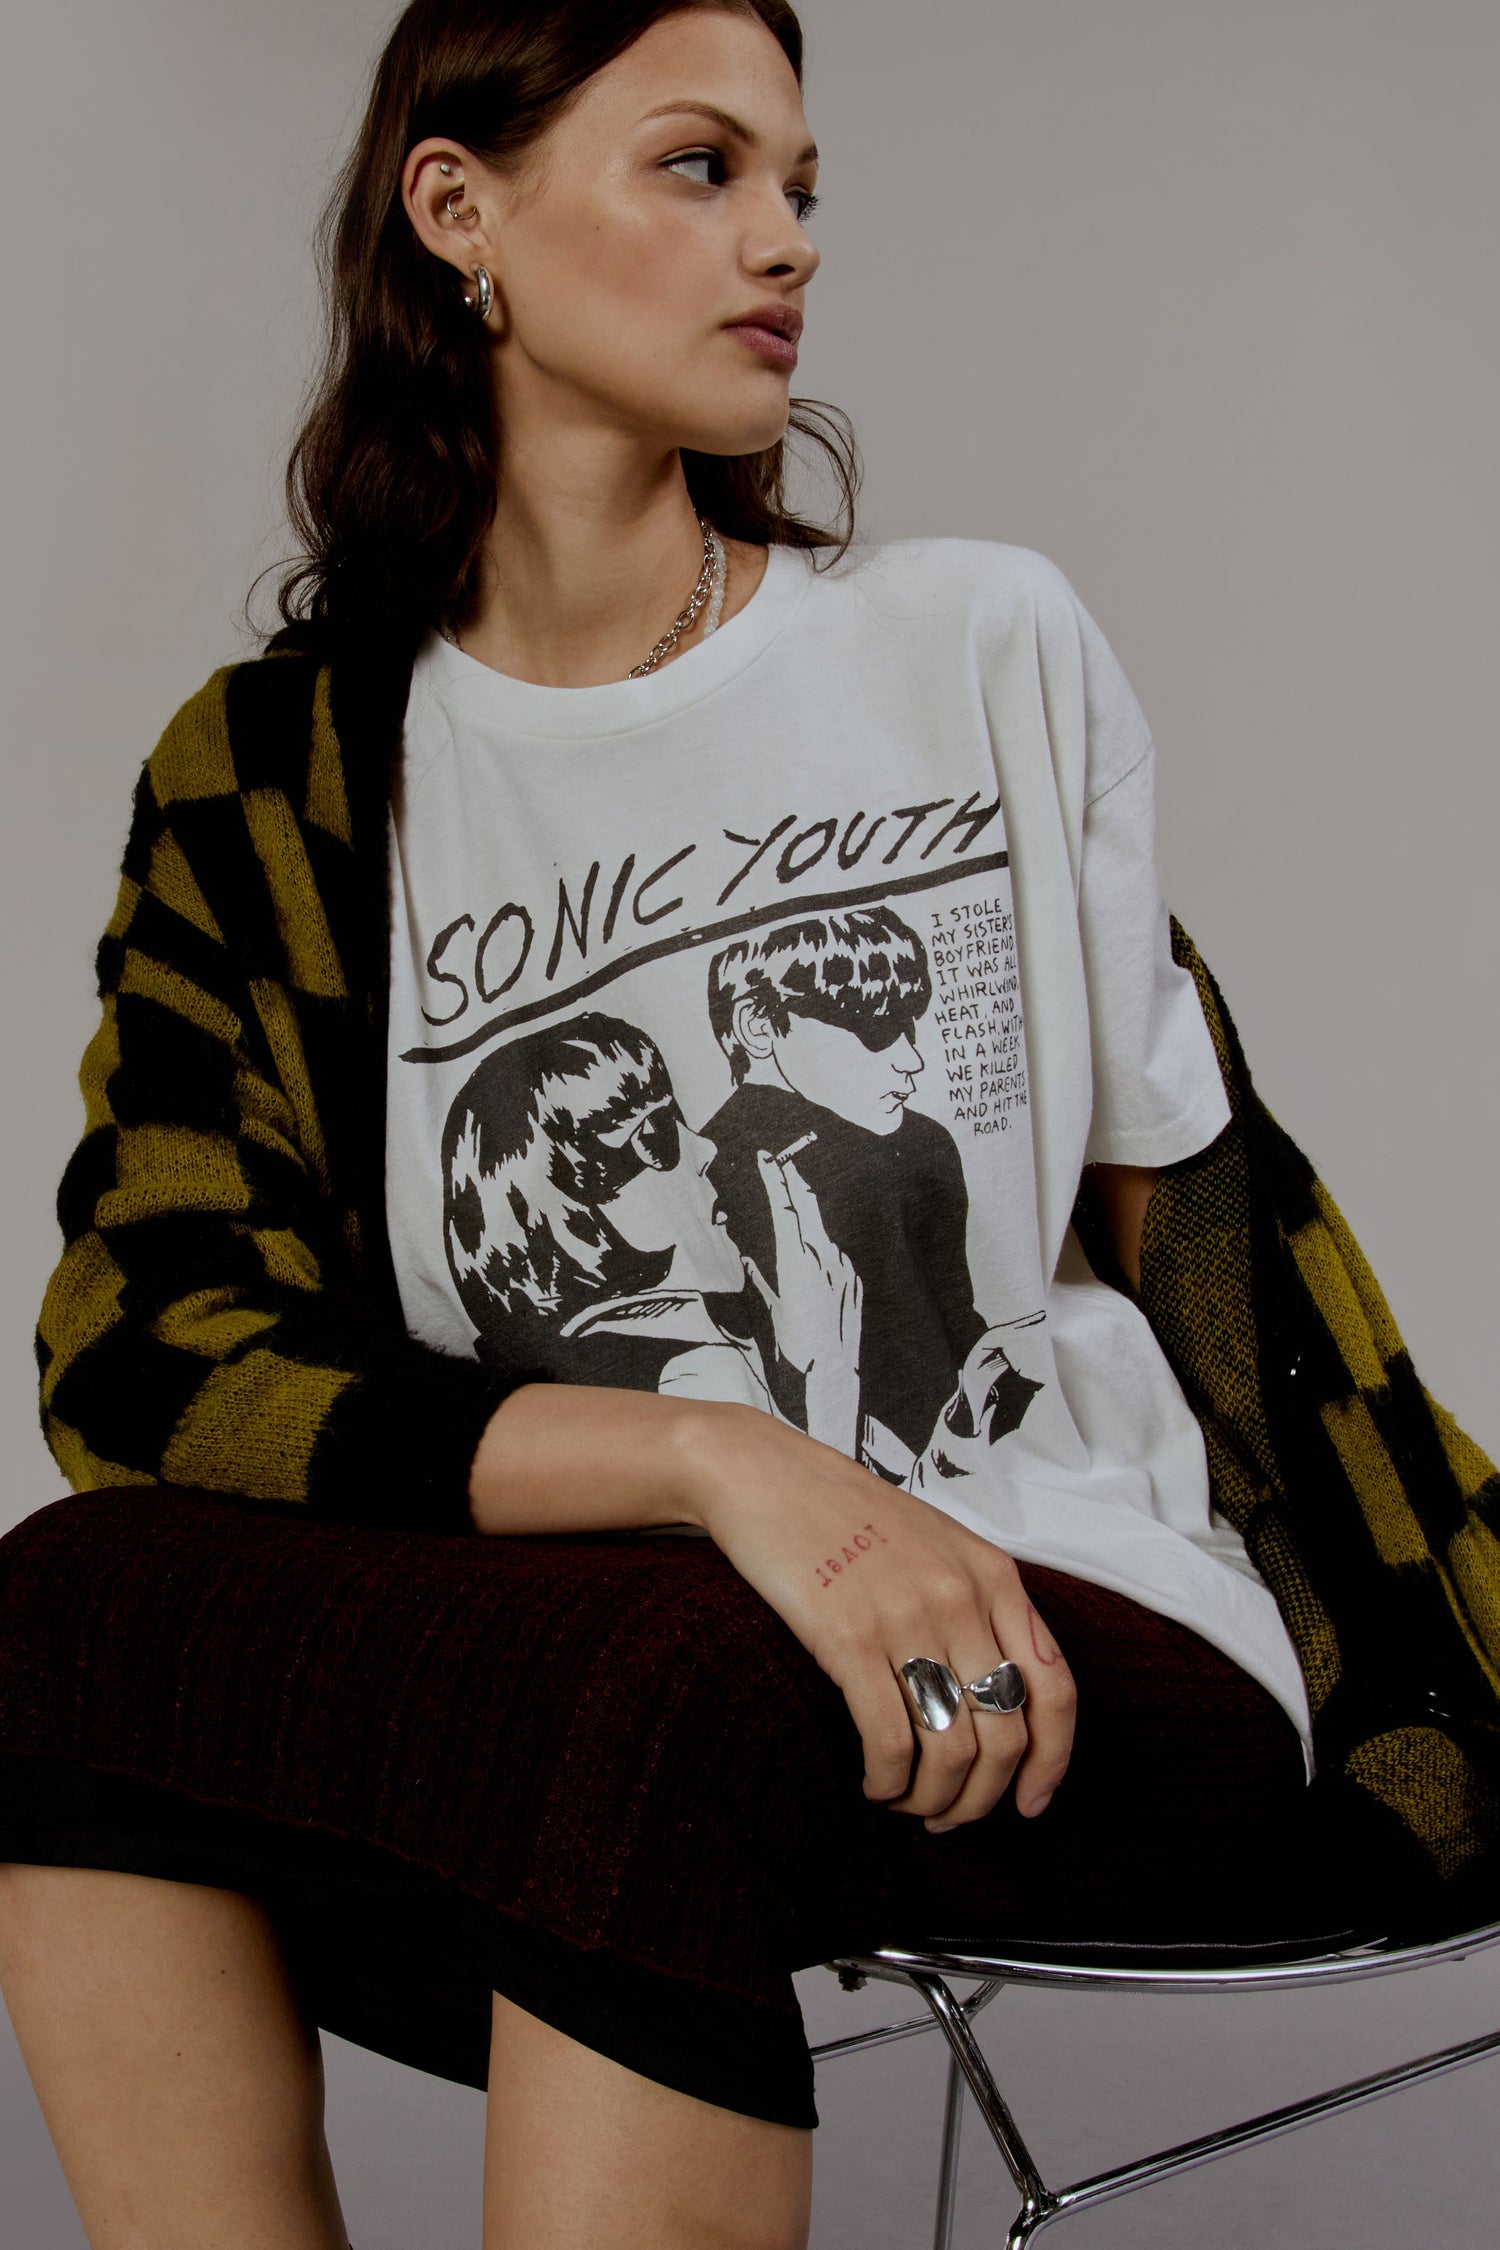 sonic youth graphic tee